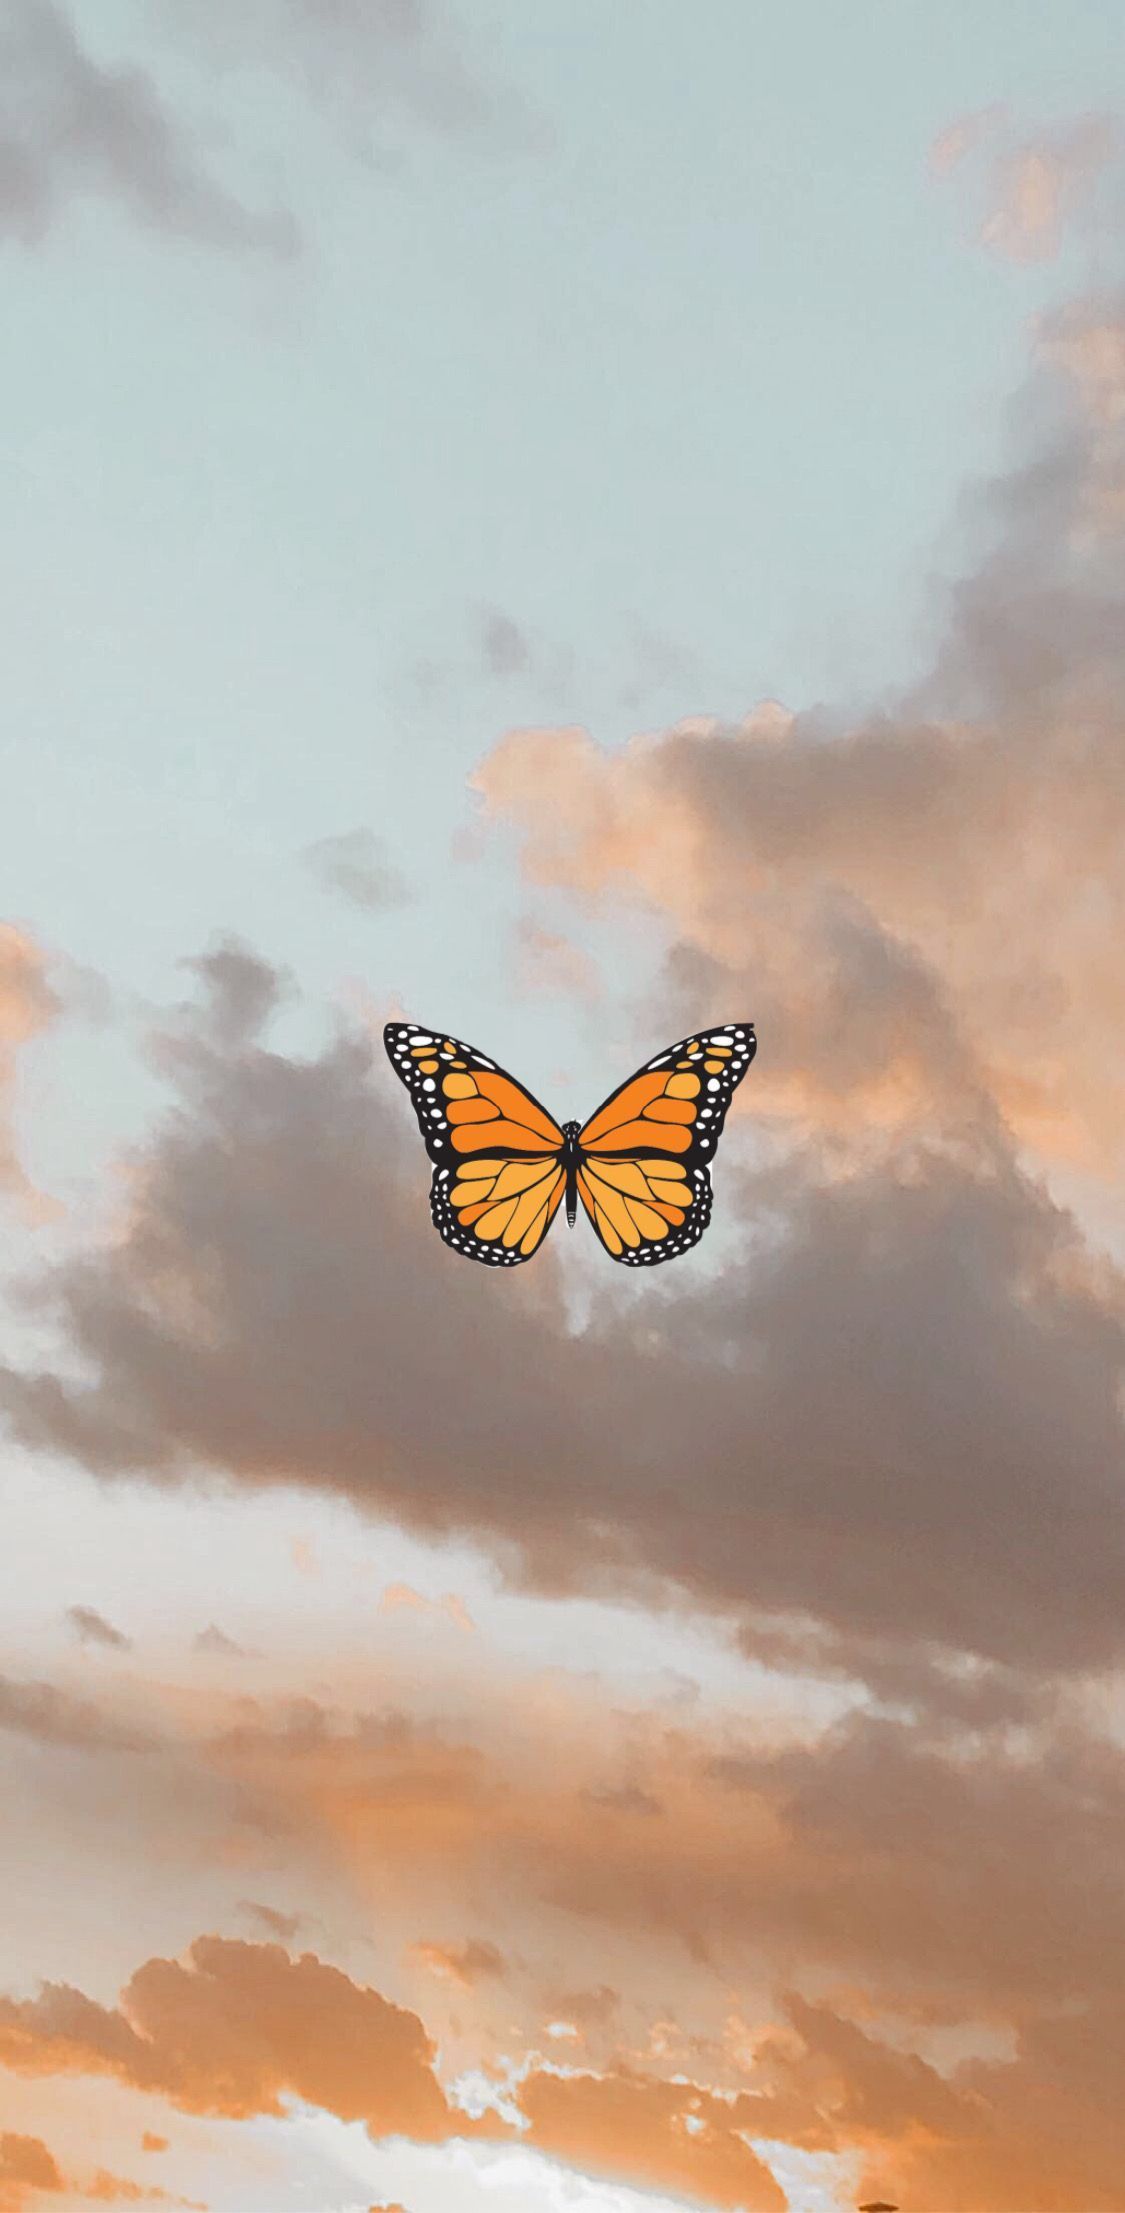 A butterfly flying over the clouds at sunset - VSCO